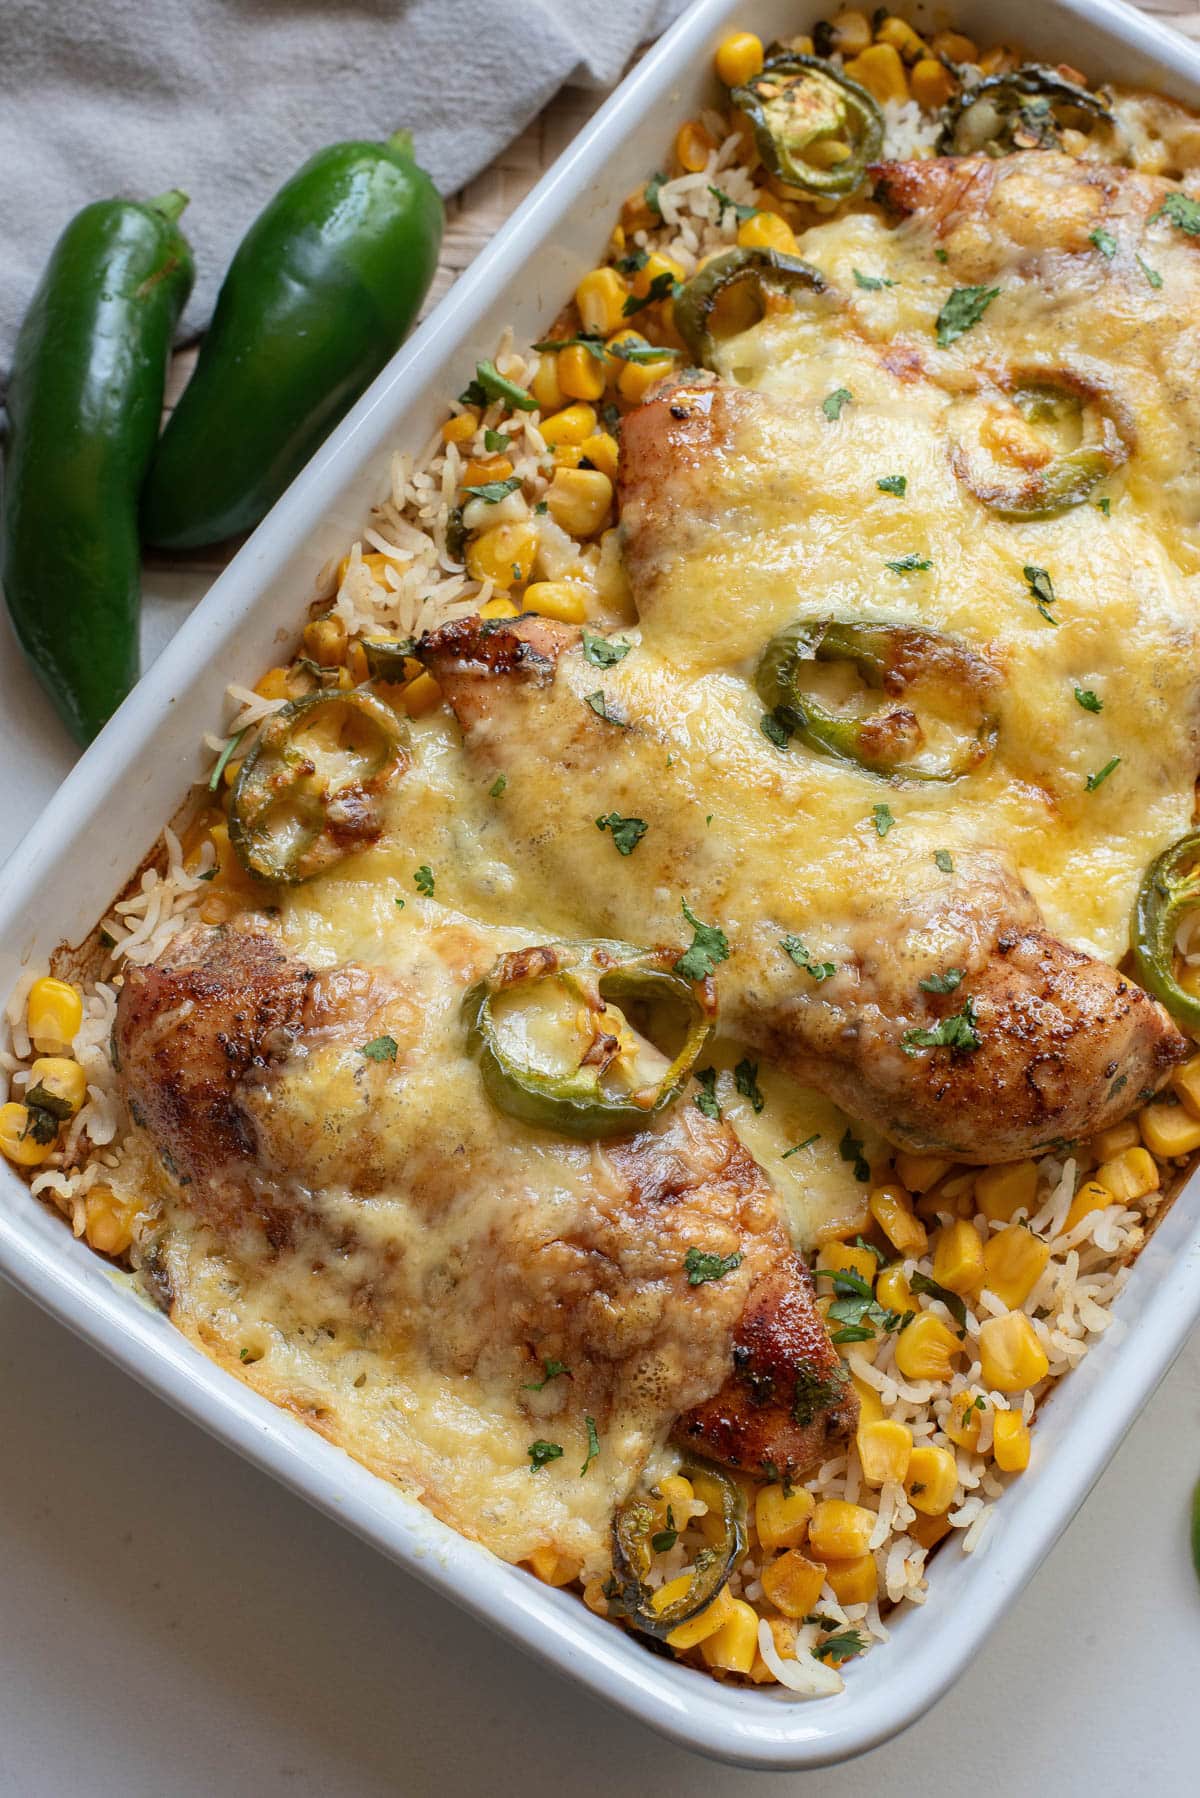 Chicken and rice casserole covered with cheese in a white baking dish.